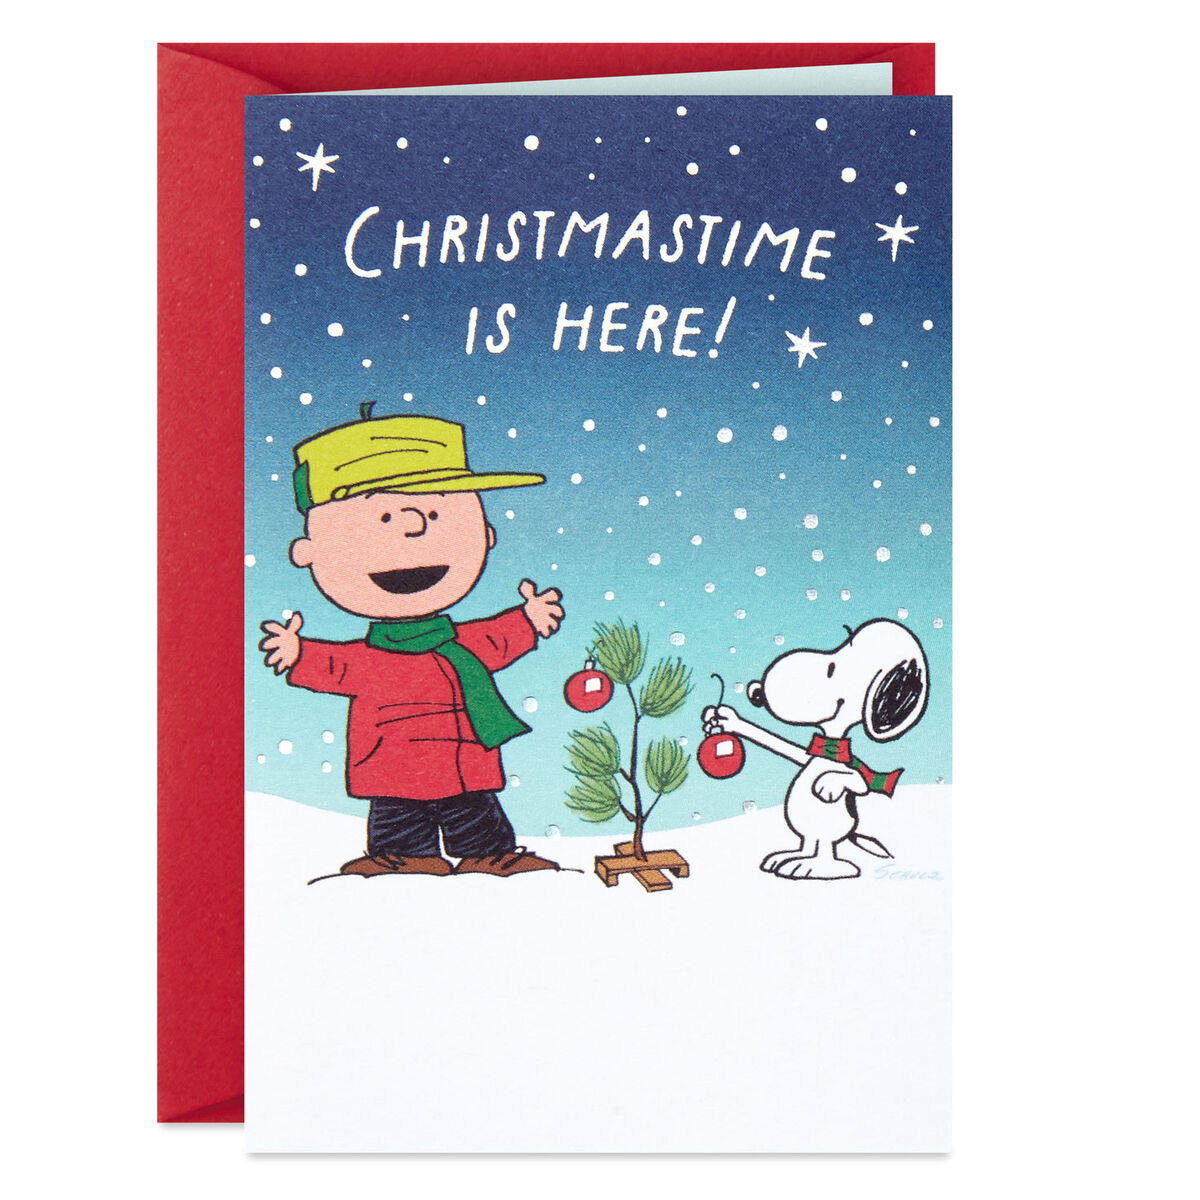 3-25-mini-peanuts-charlie-brown-and-snoopy-christmas-card-greeting